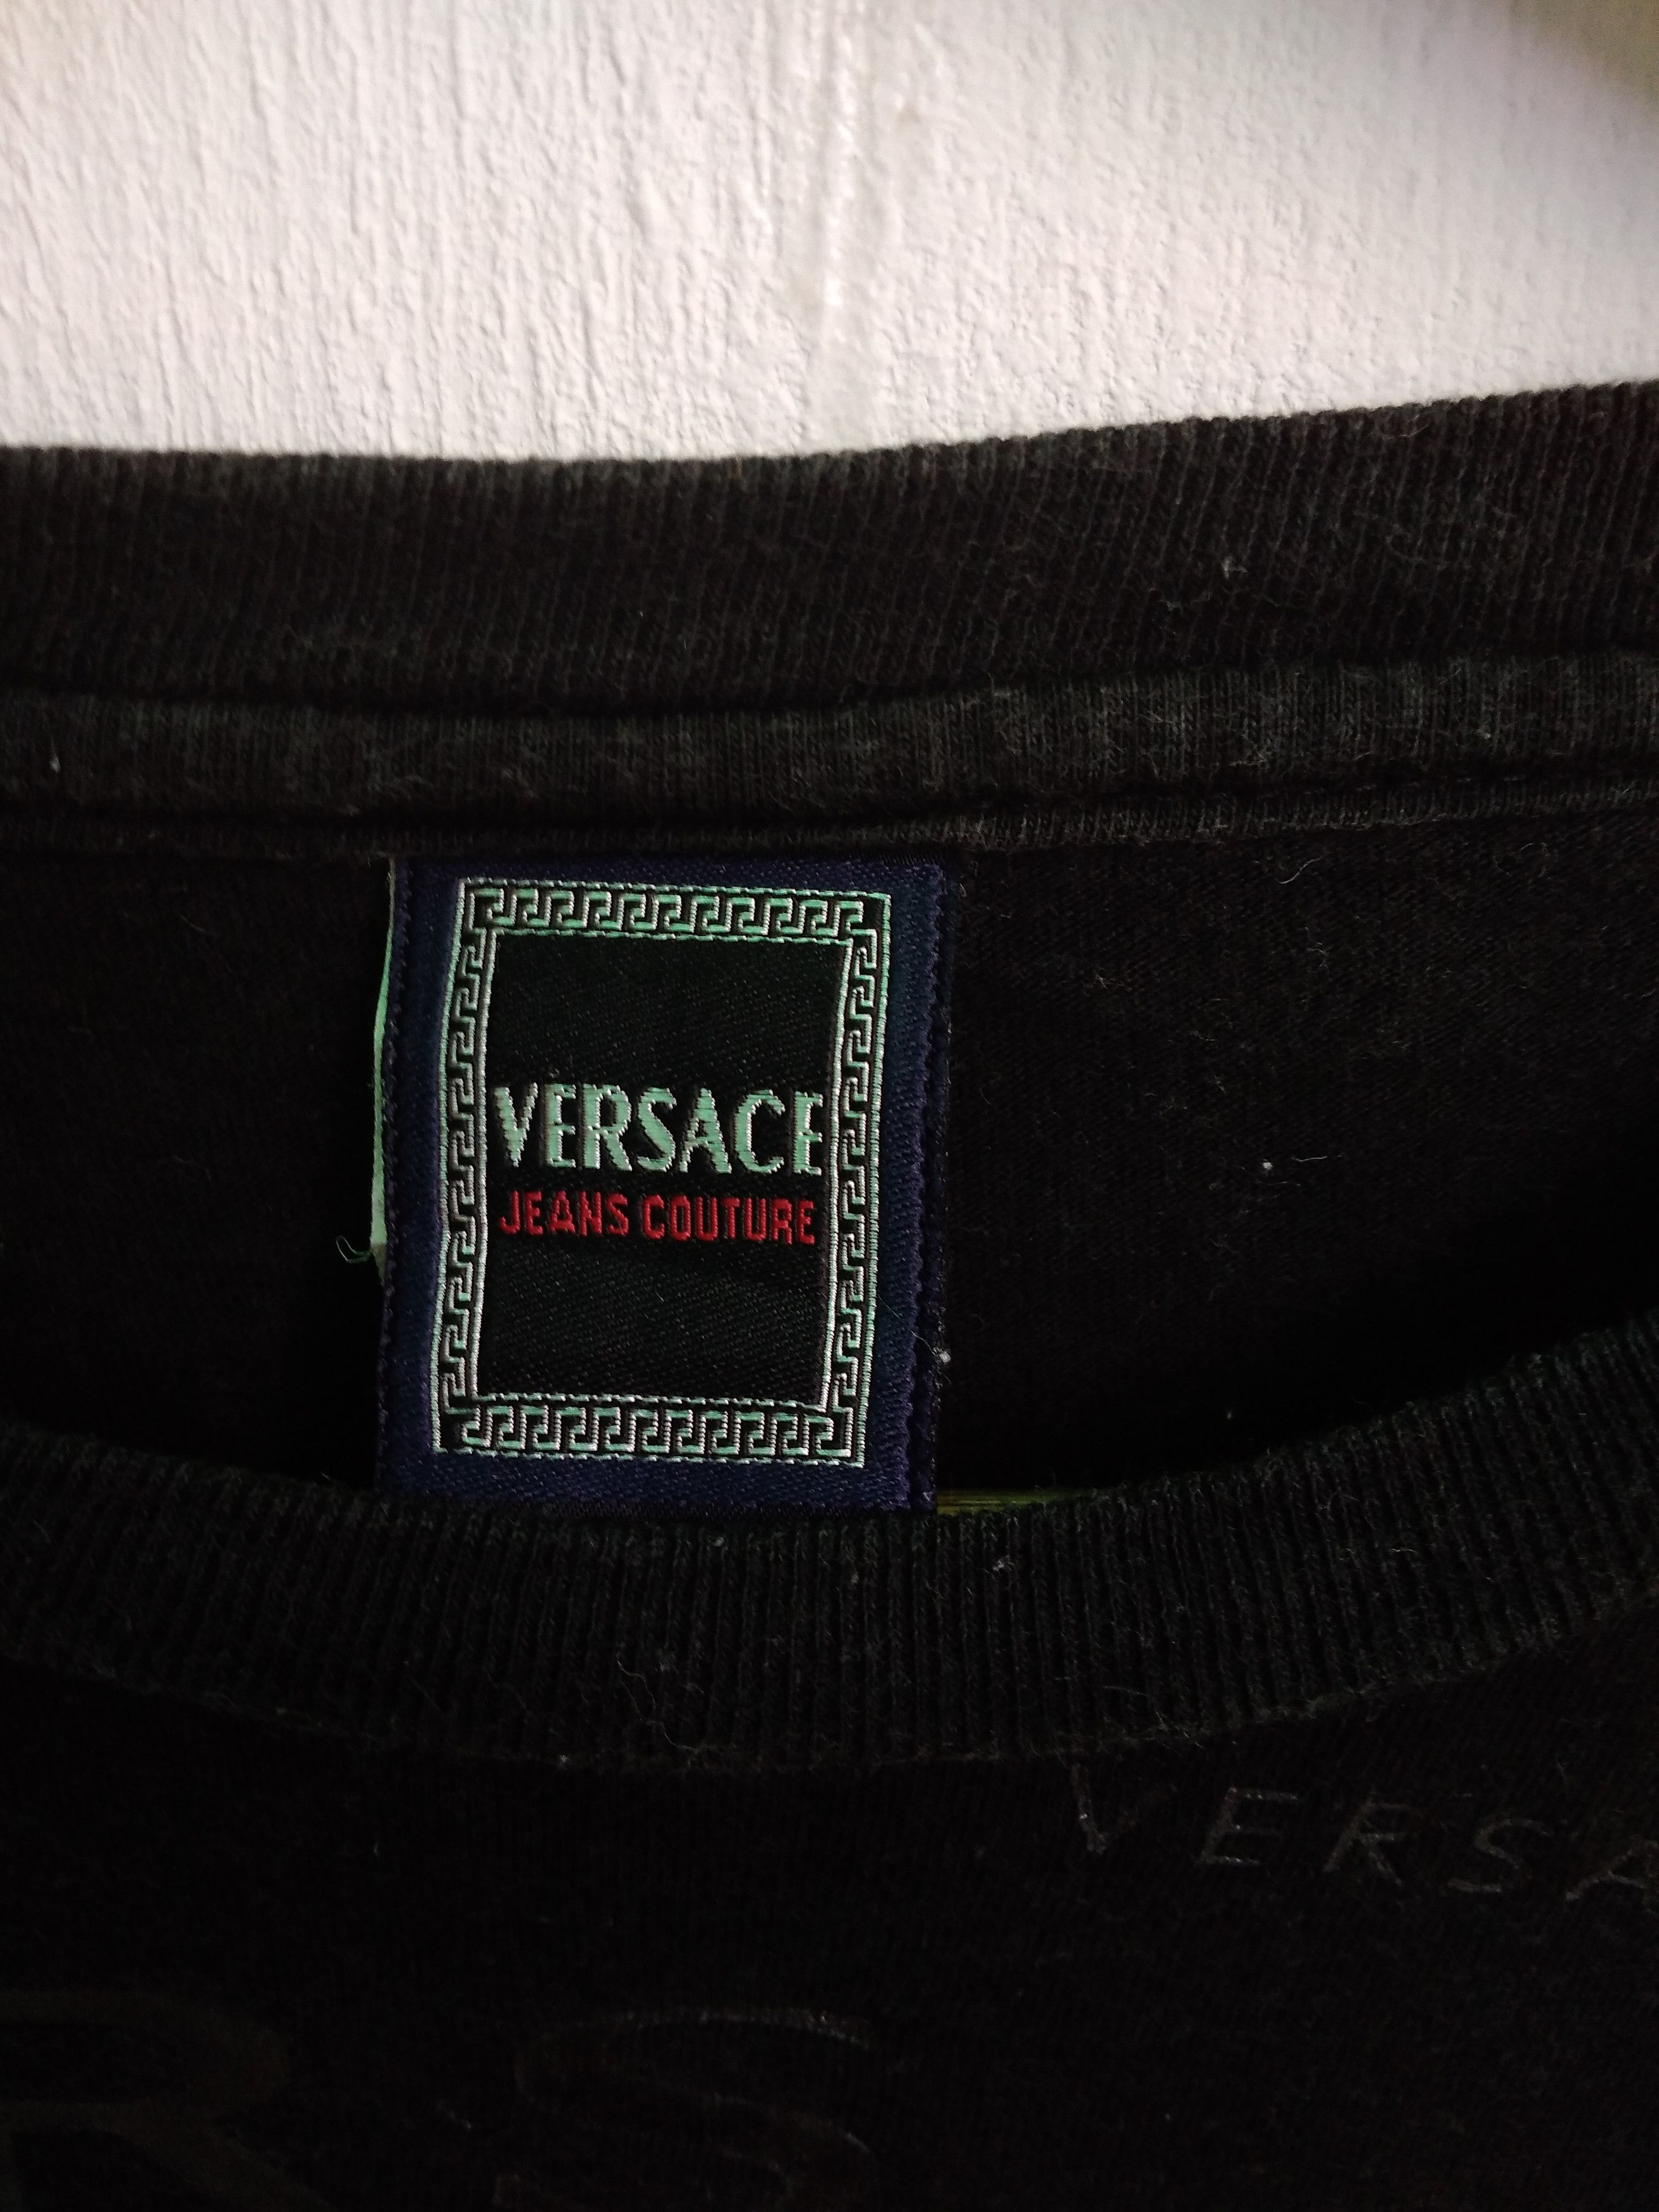 Rare Versace Jeans Couture Full Print Made in Italy - 2